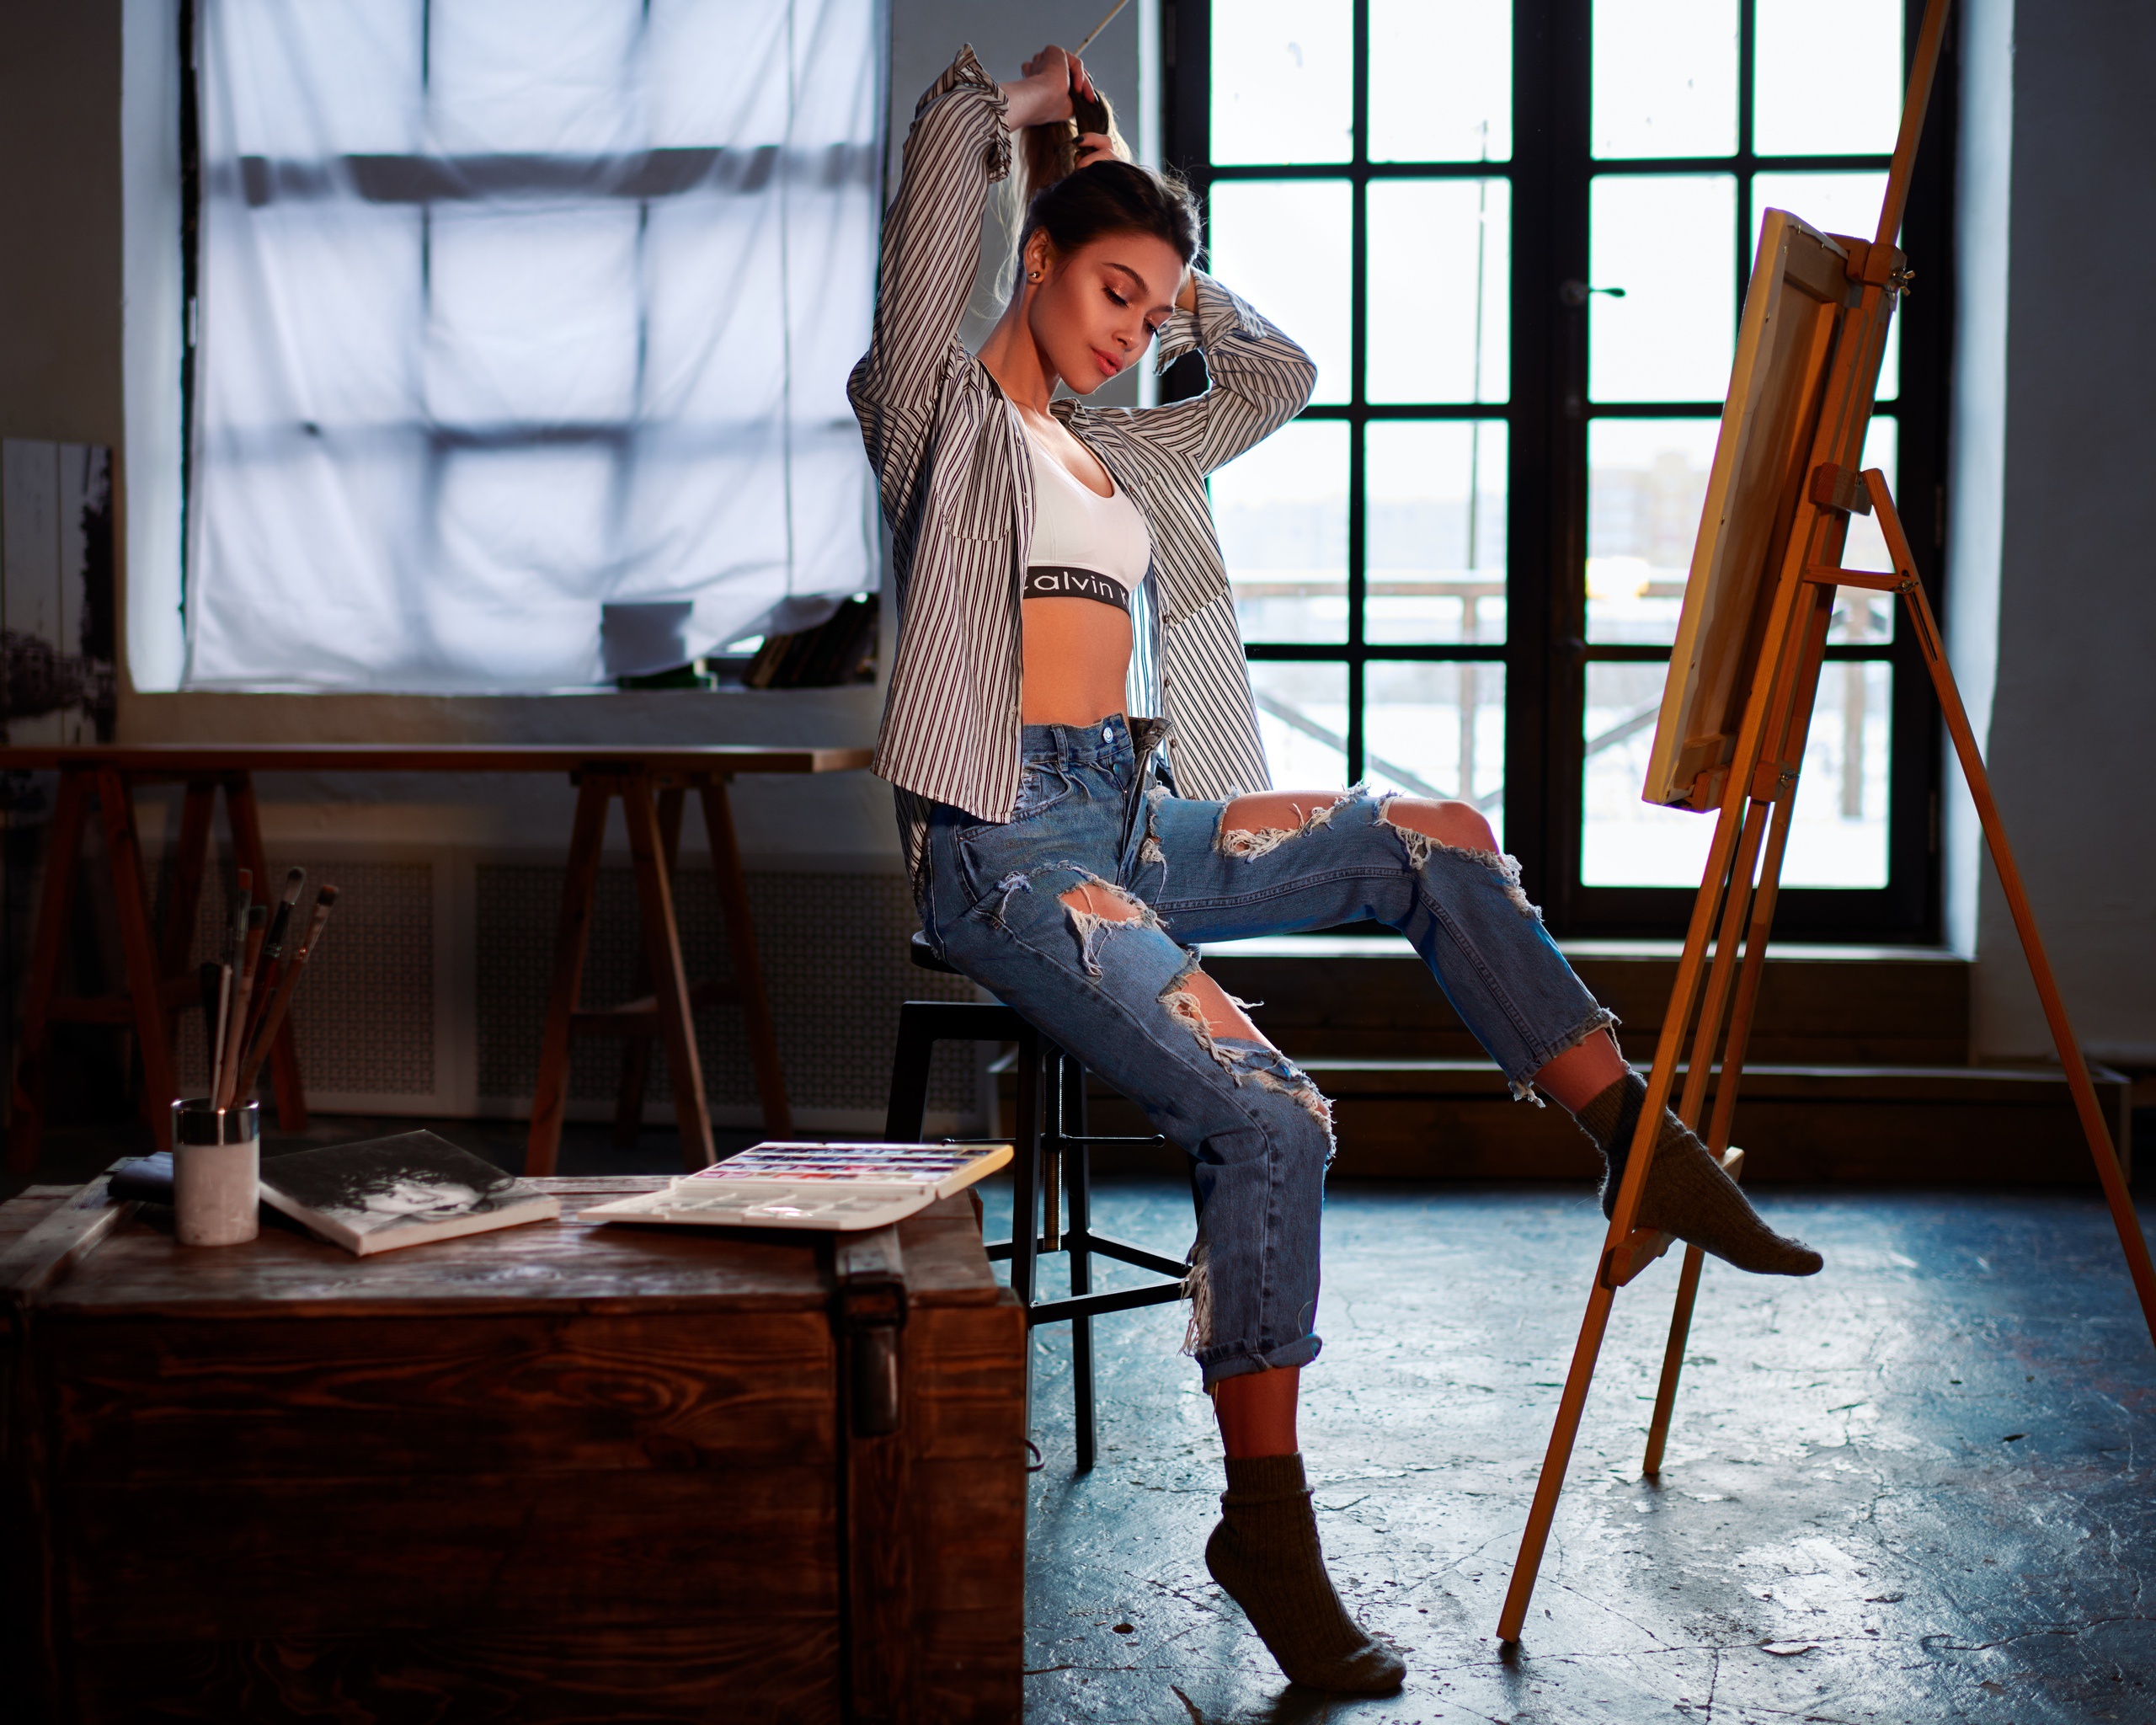 Sergey Olshevsky Anastasia Lukina Torn Jeans Women Model Women Indoors Jeans Ripped Clothes 2560x2048